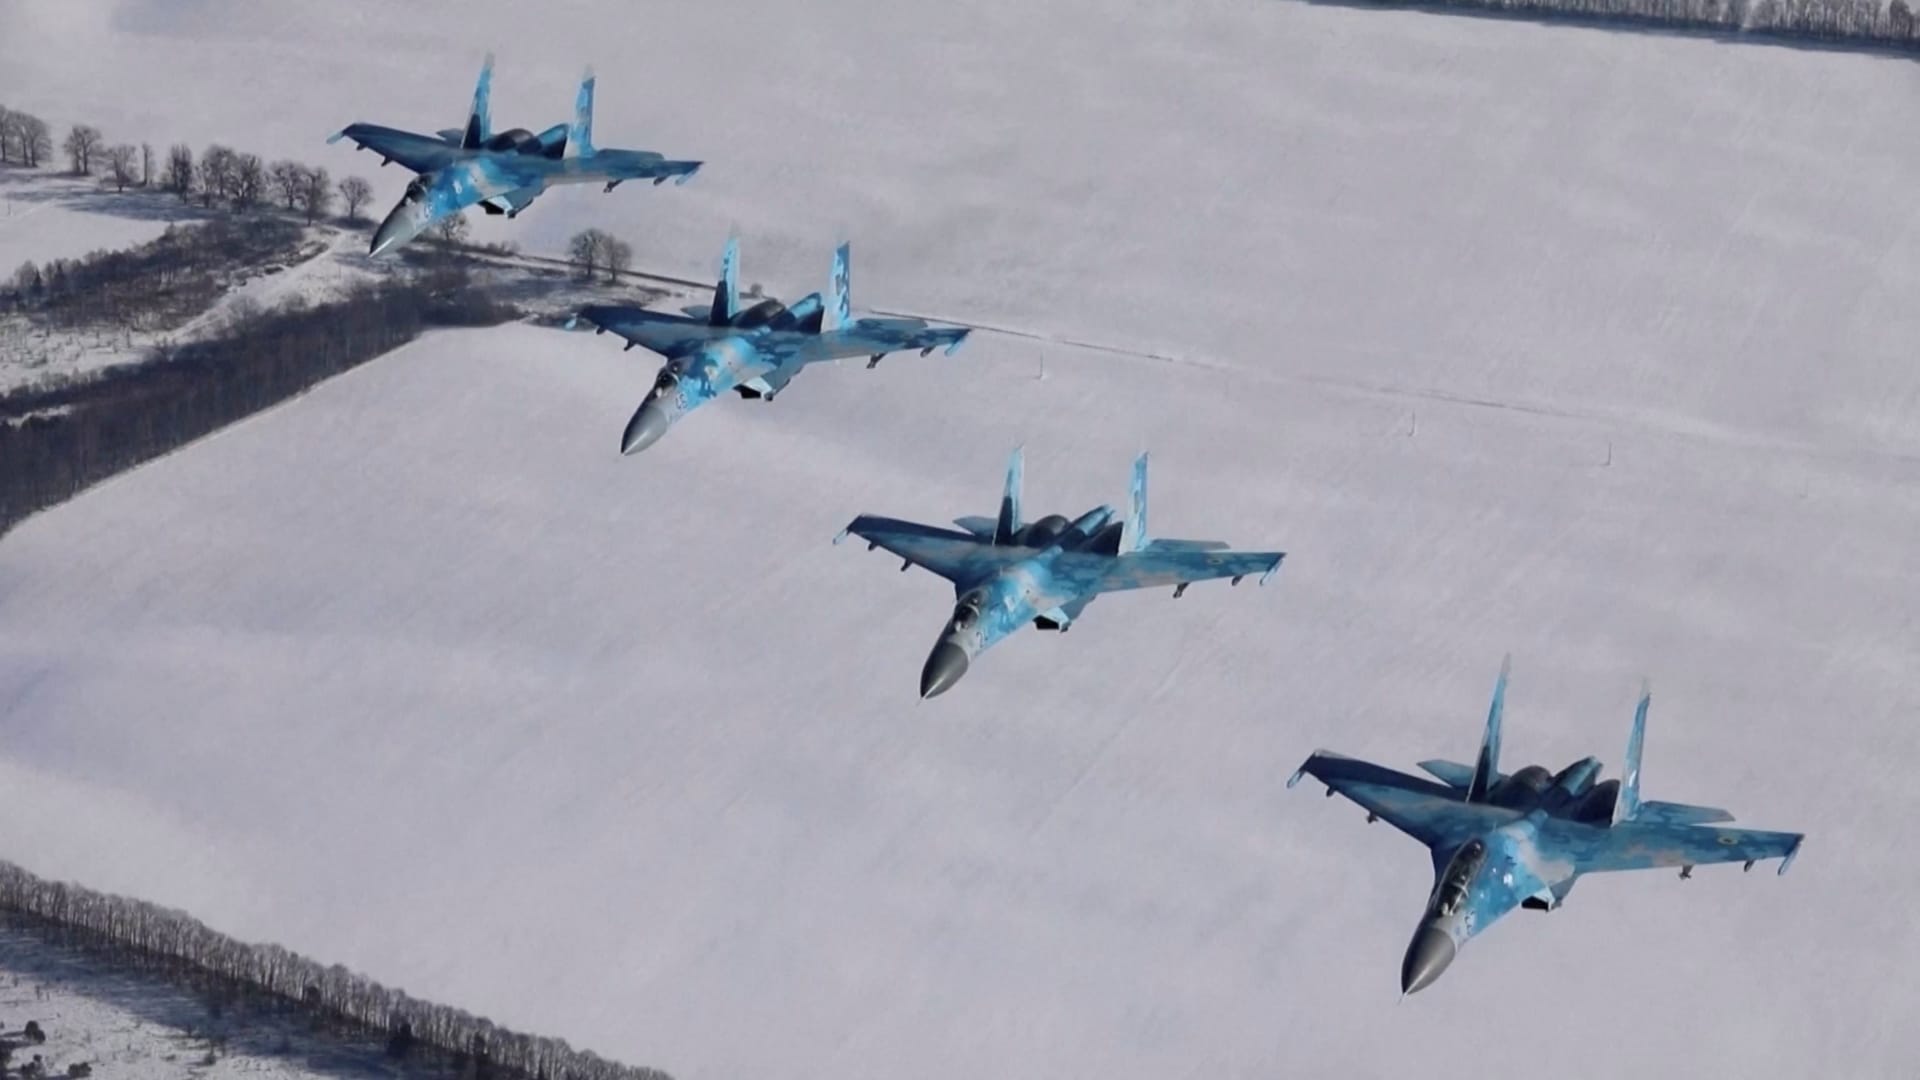 Ukrainian Air Force aircrafts flyduring drills over an unidentified location in Ukraine in this screen grab from an undated handout video.